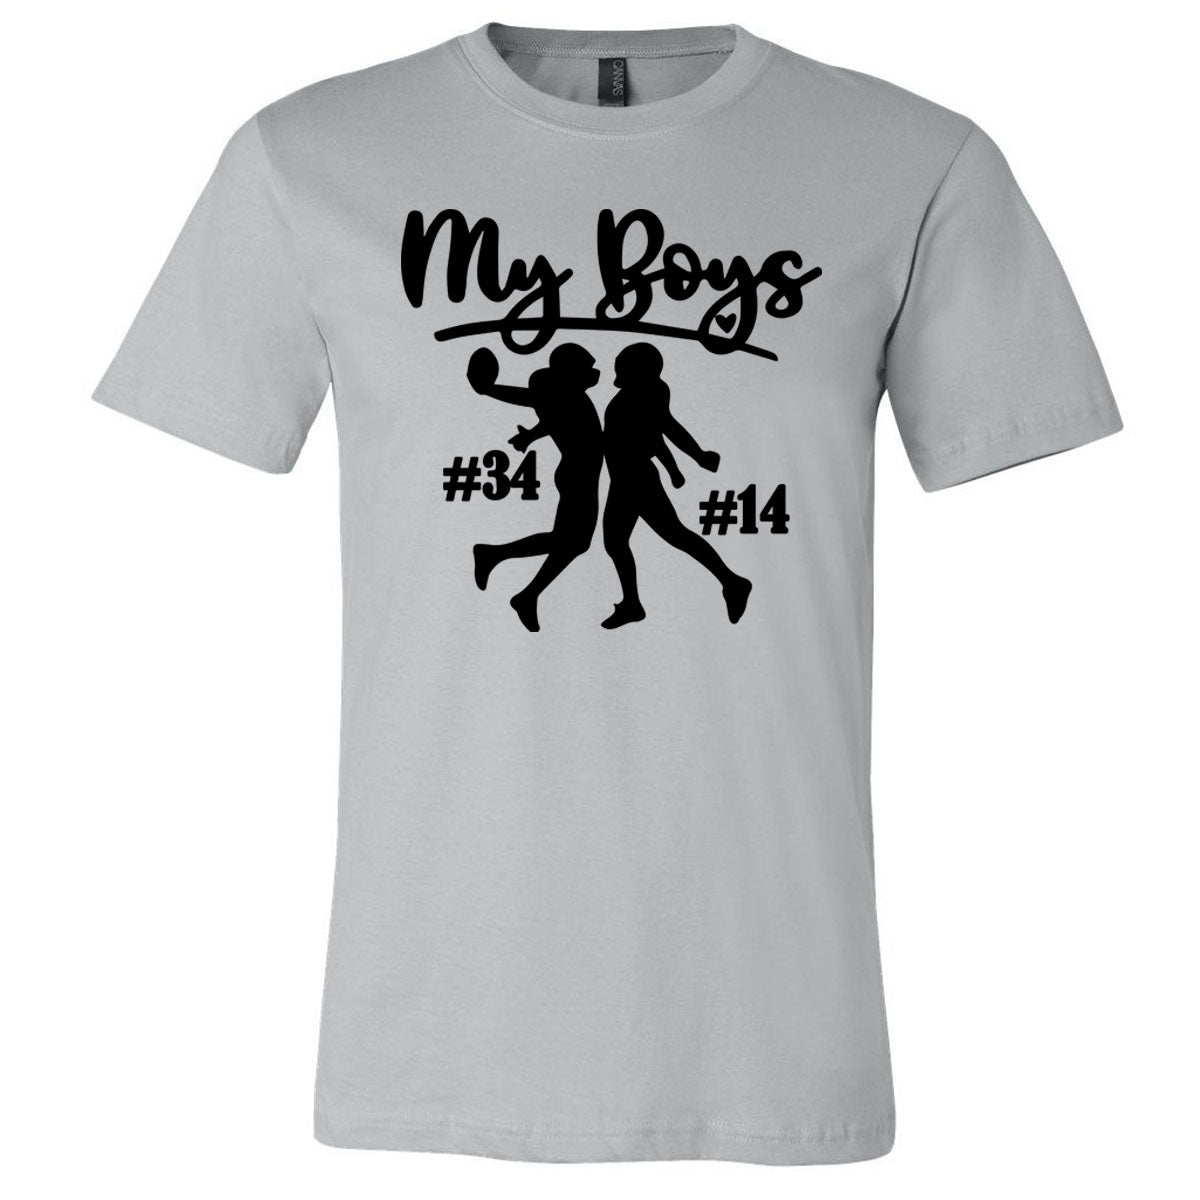 Football - My Boys - Silver Shortsleeves Tee - Southern Grace Creations